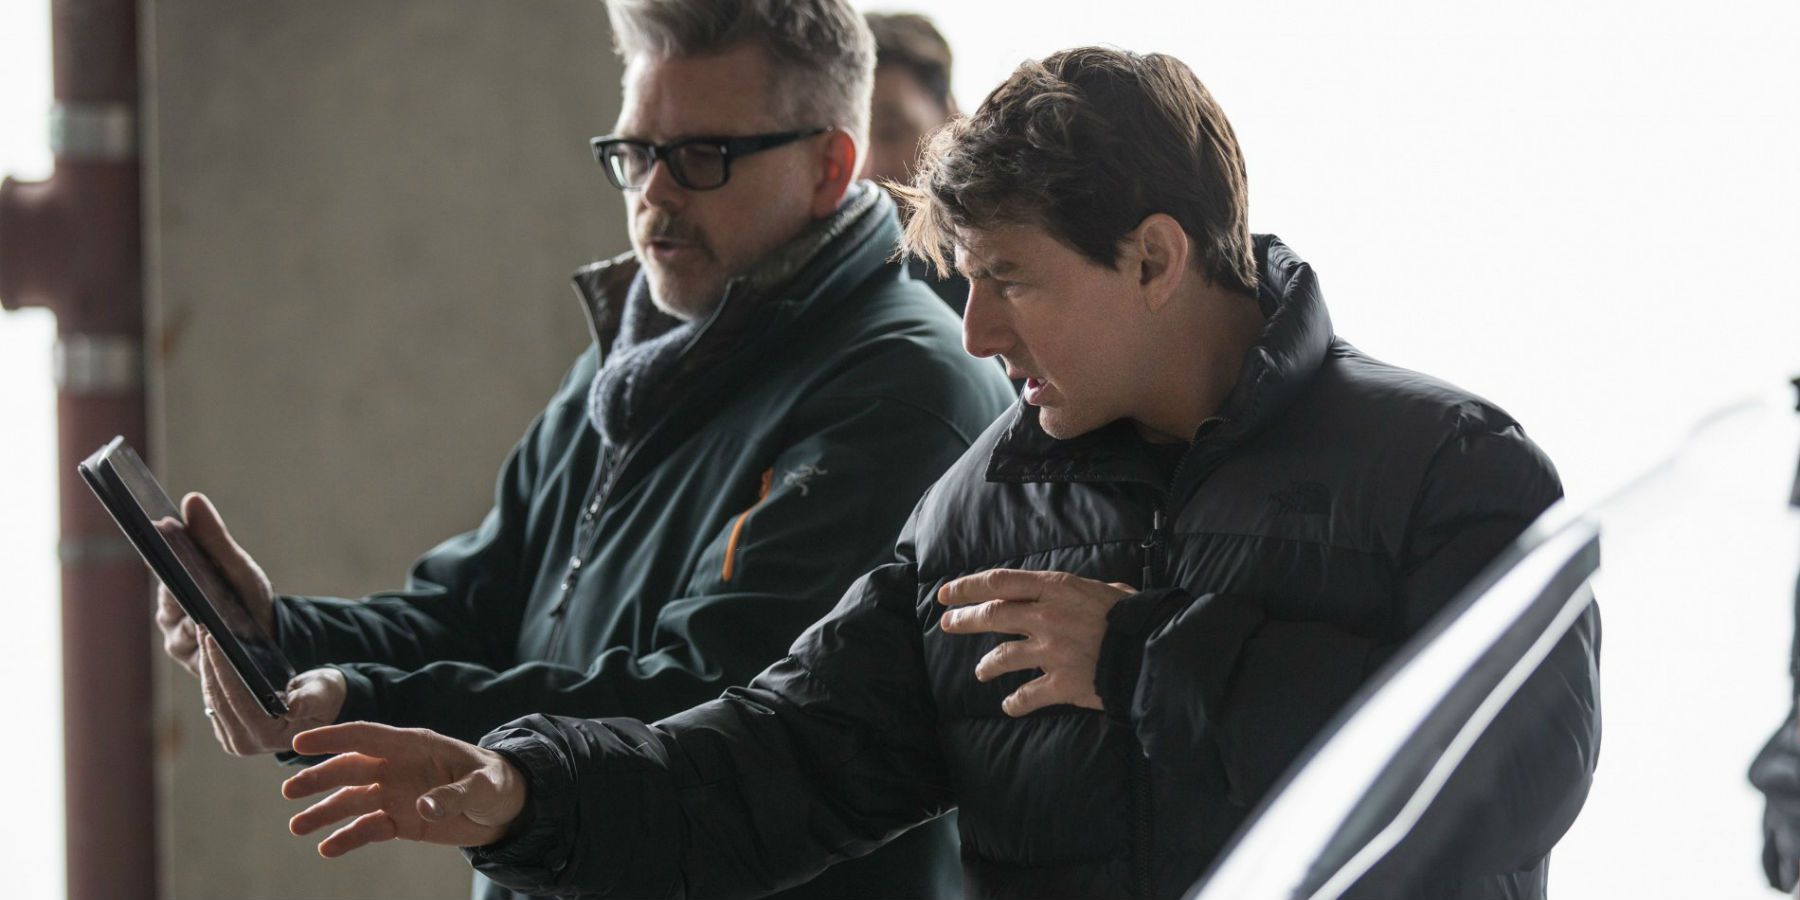 Mission Impossible Fallout - Christopher McQuarrie and Tom Cruise